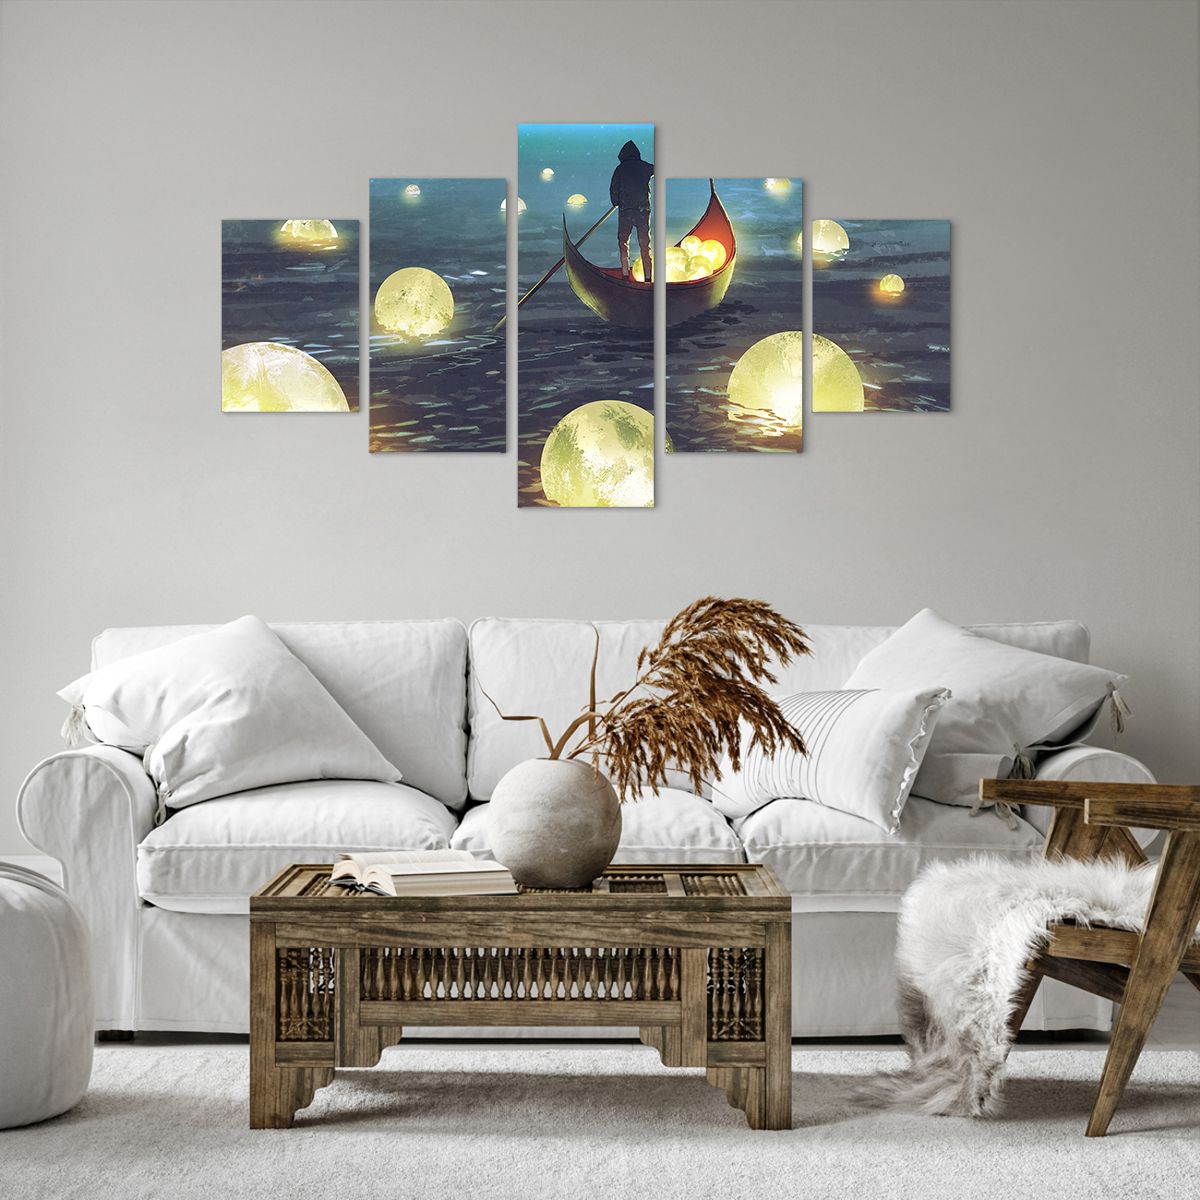 Impression sur toile Abstraction, Impression sur toile Fantaisie, Impression sur toile Bateau, Impression sur toile Pêcheur, Impression sur toile Lune